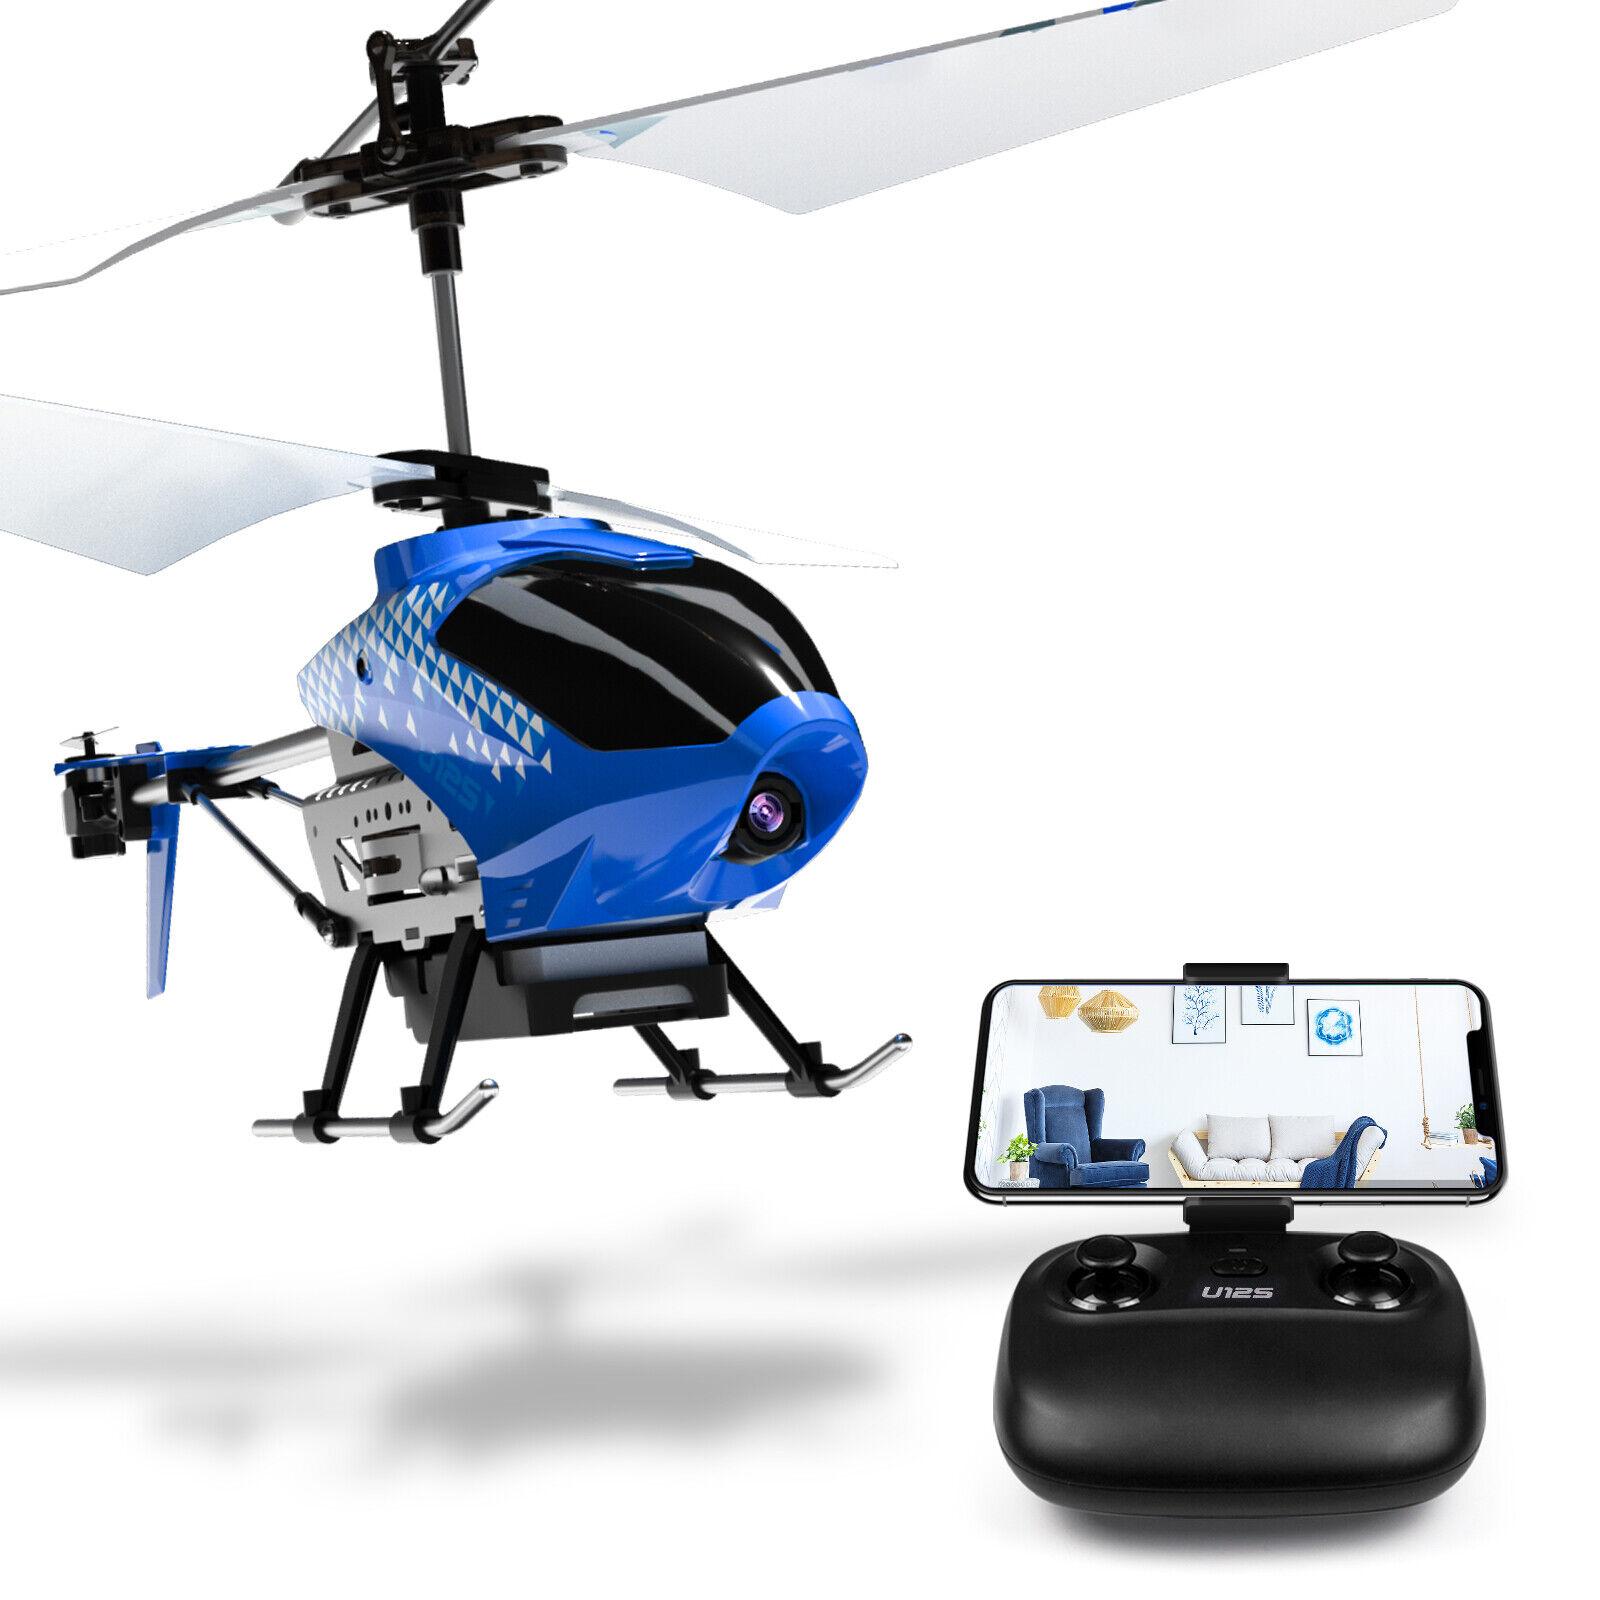 Control Helicopter Price: Where to Find the Best Control Helicopter Deals